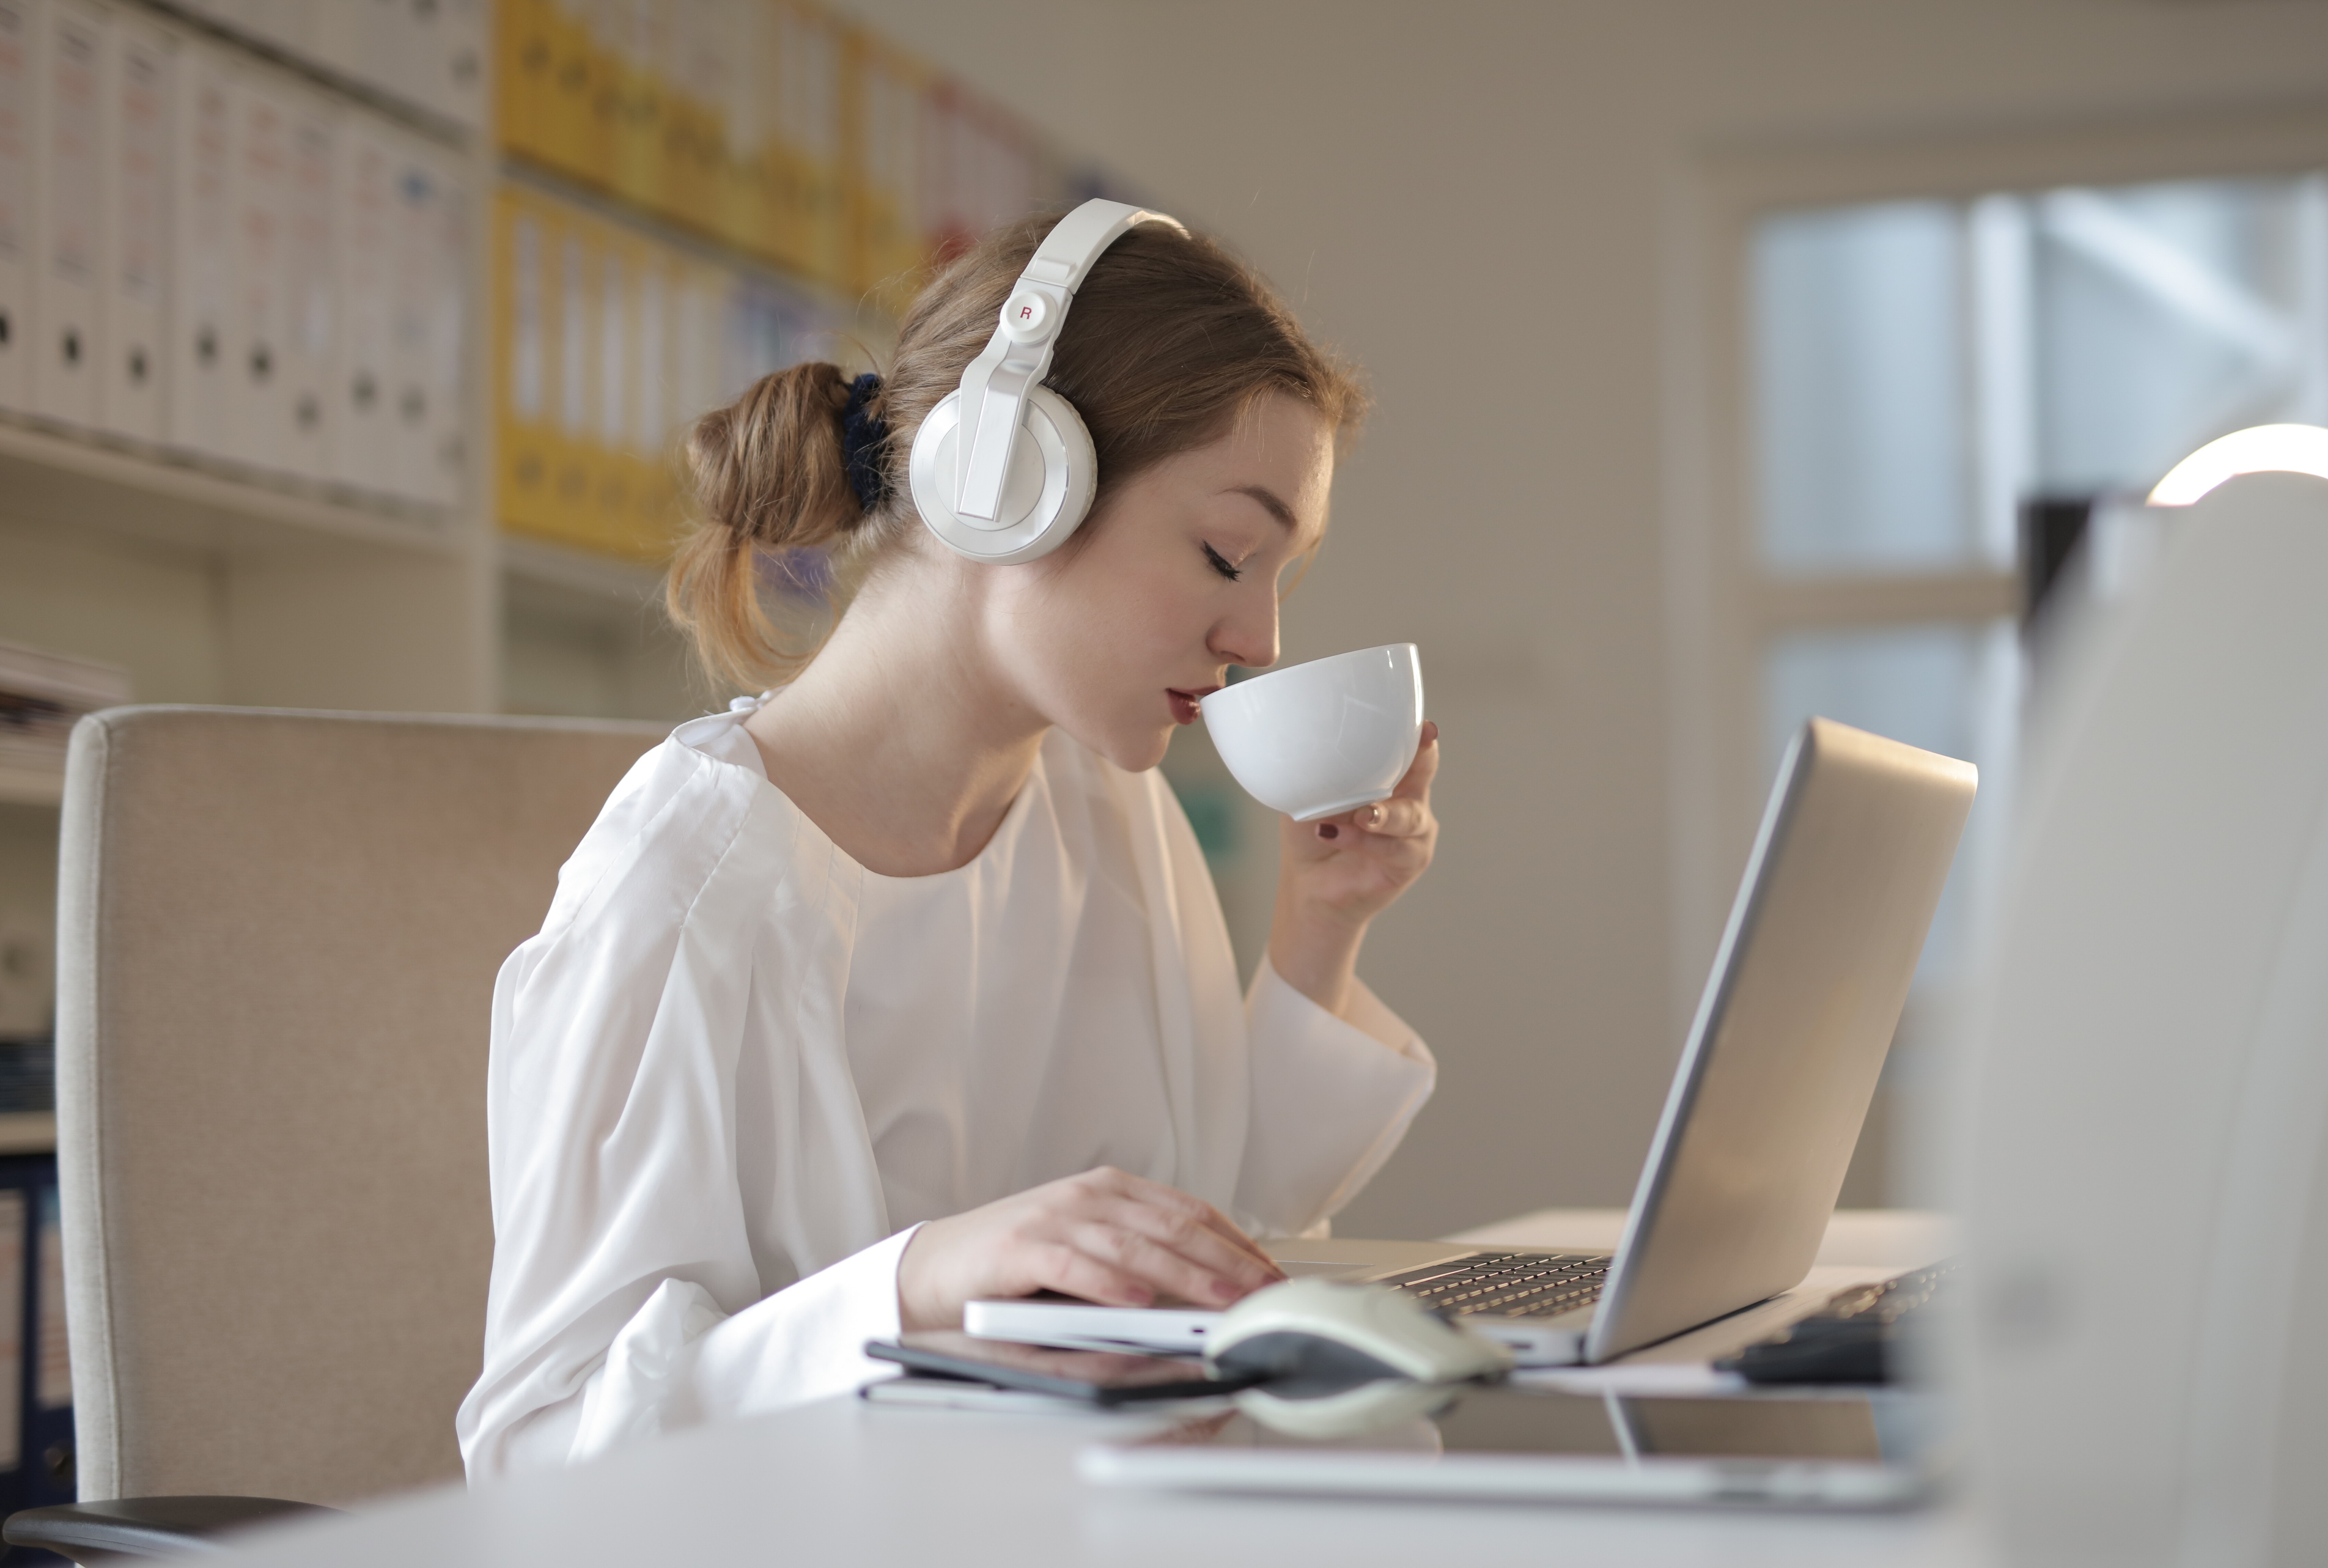 10 Best Podcasts to Listen to at Work